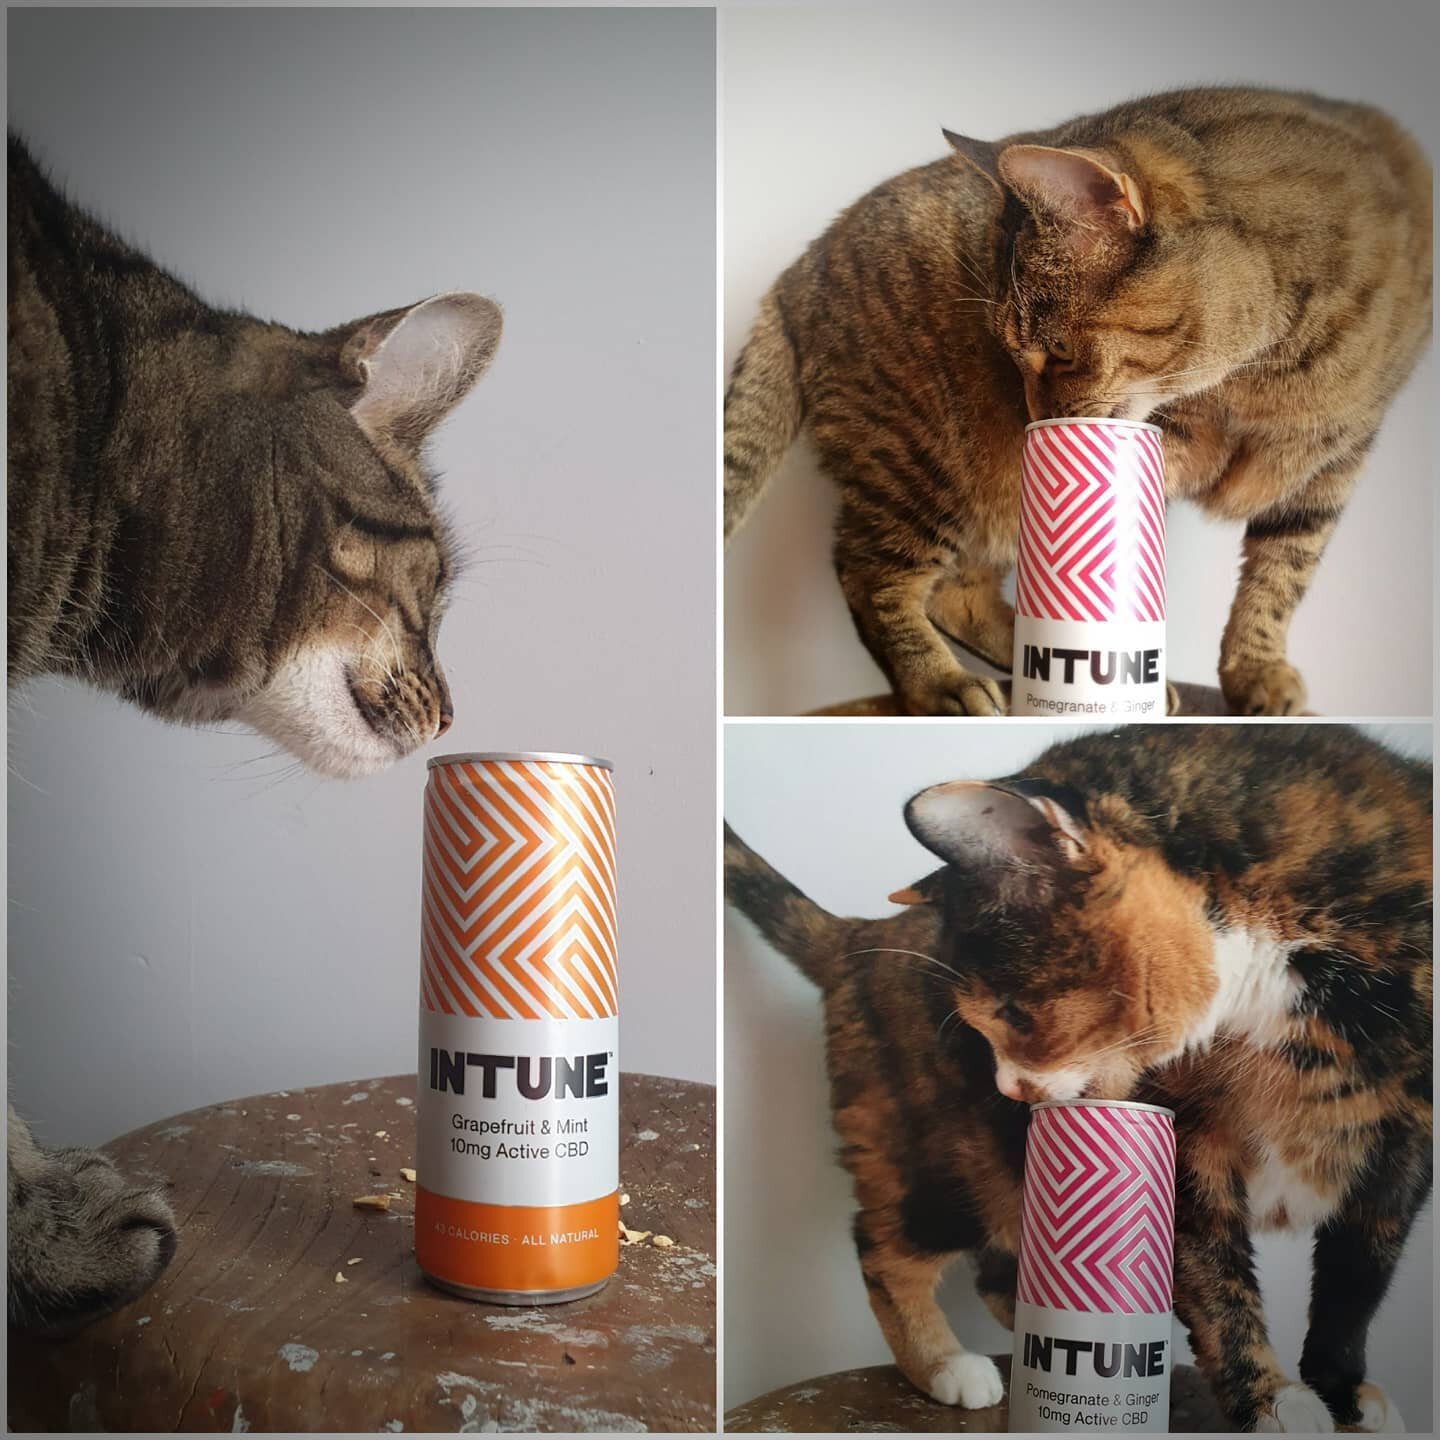 3 out of 3 cats prefer @intunedrinks , check our range of #cbdrinks in our fridges!

#cbd #specialitydrinks #cats #catsofinstagram #petfriendlydublin #petfriendly #chill #summervibes #nocatswereharmedinthemakingofthisphoto